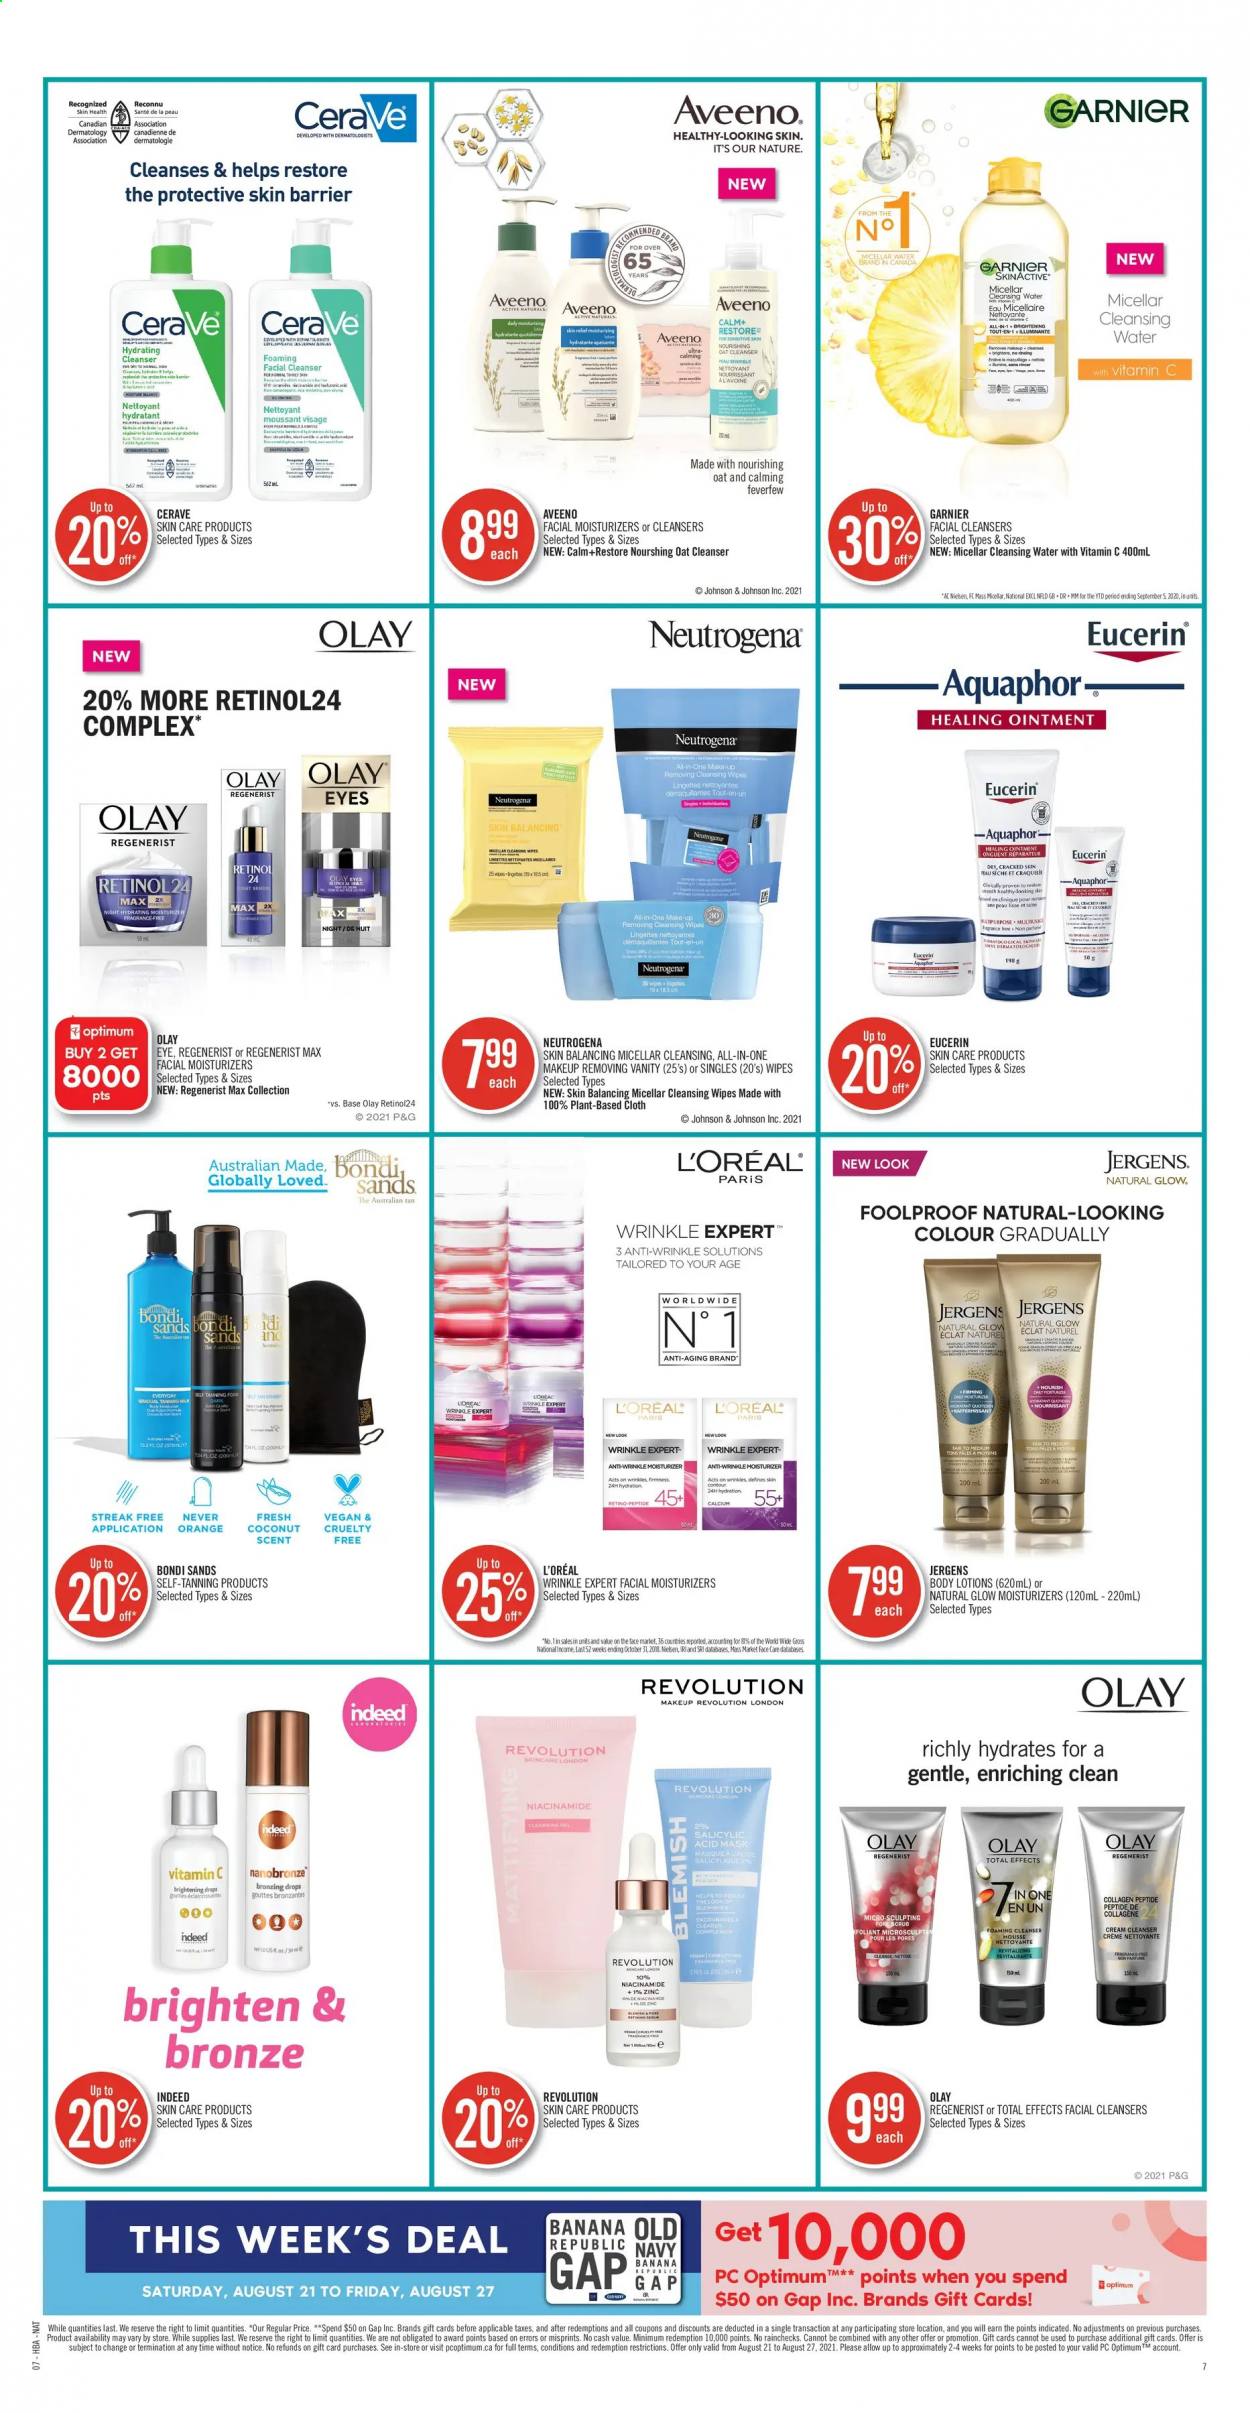 thumbnail - Shoppers Drug Mart Flyer - August 21, 2021 - August 27, 2021 - Sales products - oats, cleansing wipes, wipes, Johnson's, Aquaphor, Aveeno, ointment, CeraVe, cleanser, Clinique, L’Oréal, micellar water, moisturizer, Olay, Bondi Sands, Niacinamide, body lotion, Jergens, self tanning product, Eclat, makeup, contour, zinc, Eucerin, Garnier, Neutrogena. Page 9.